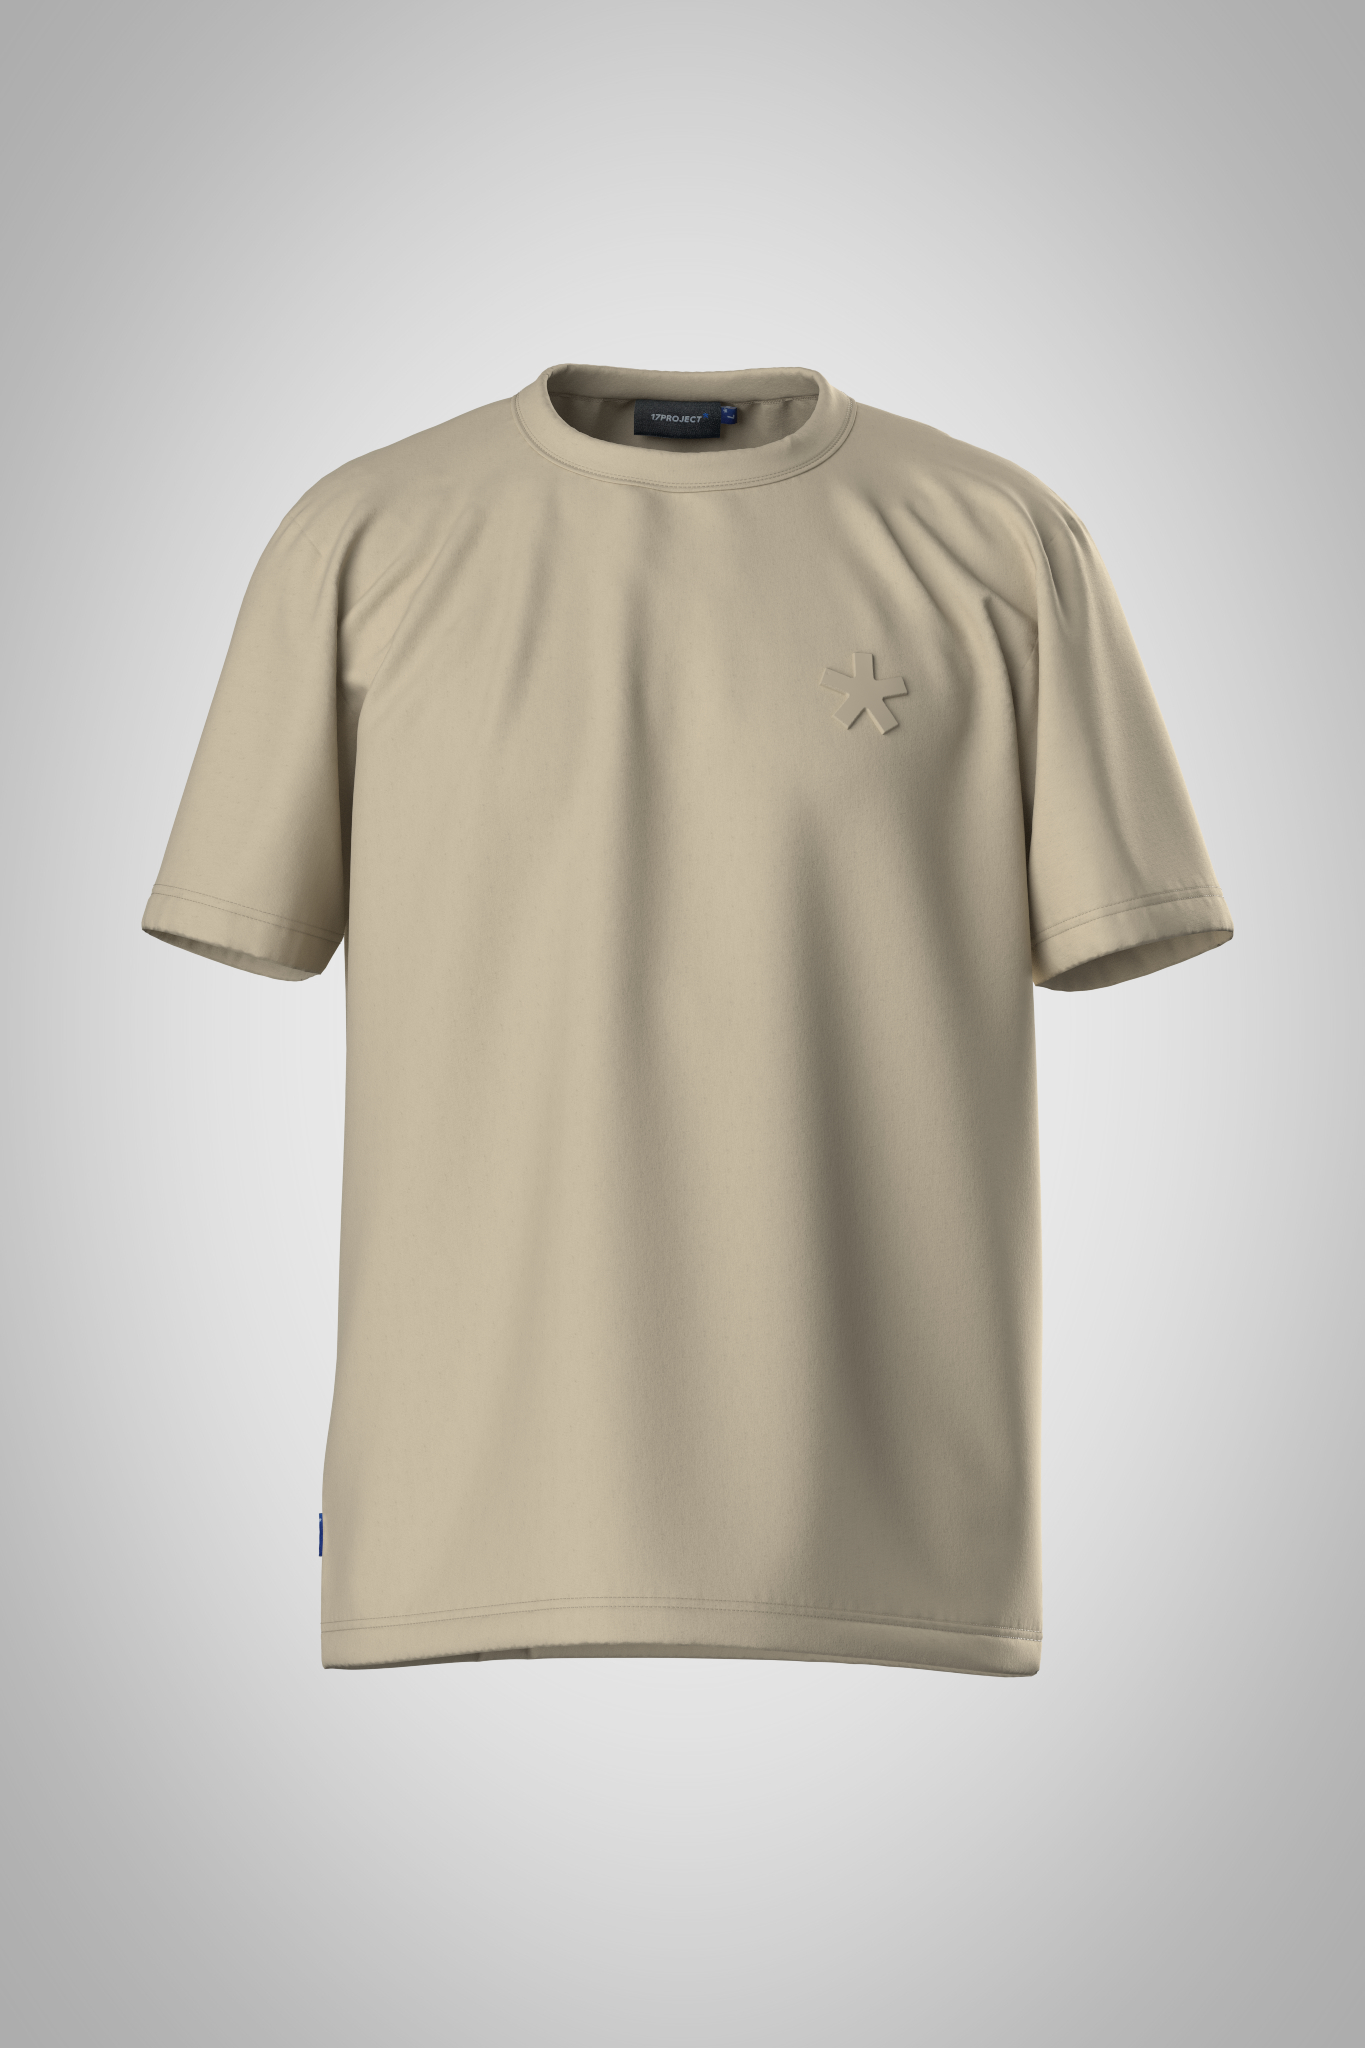 LOGO* t-shirt in sand color